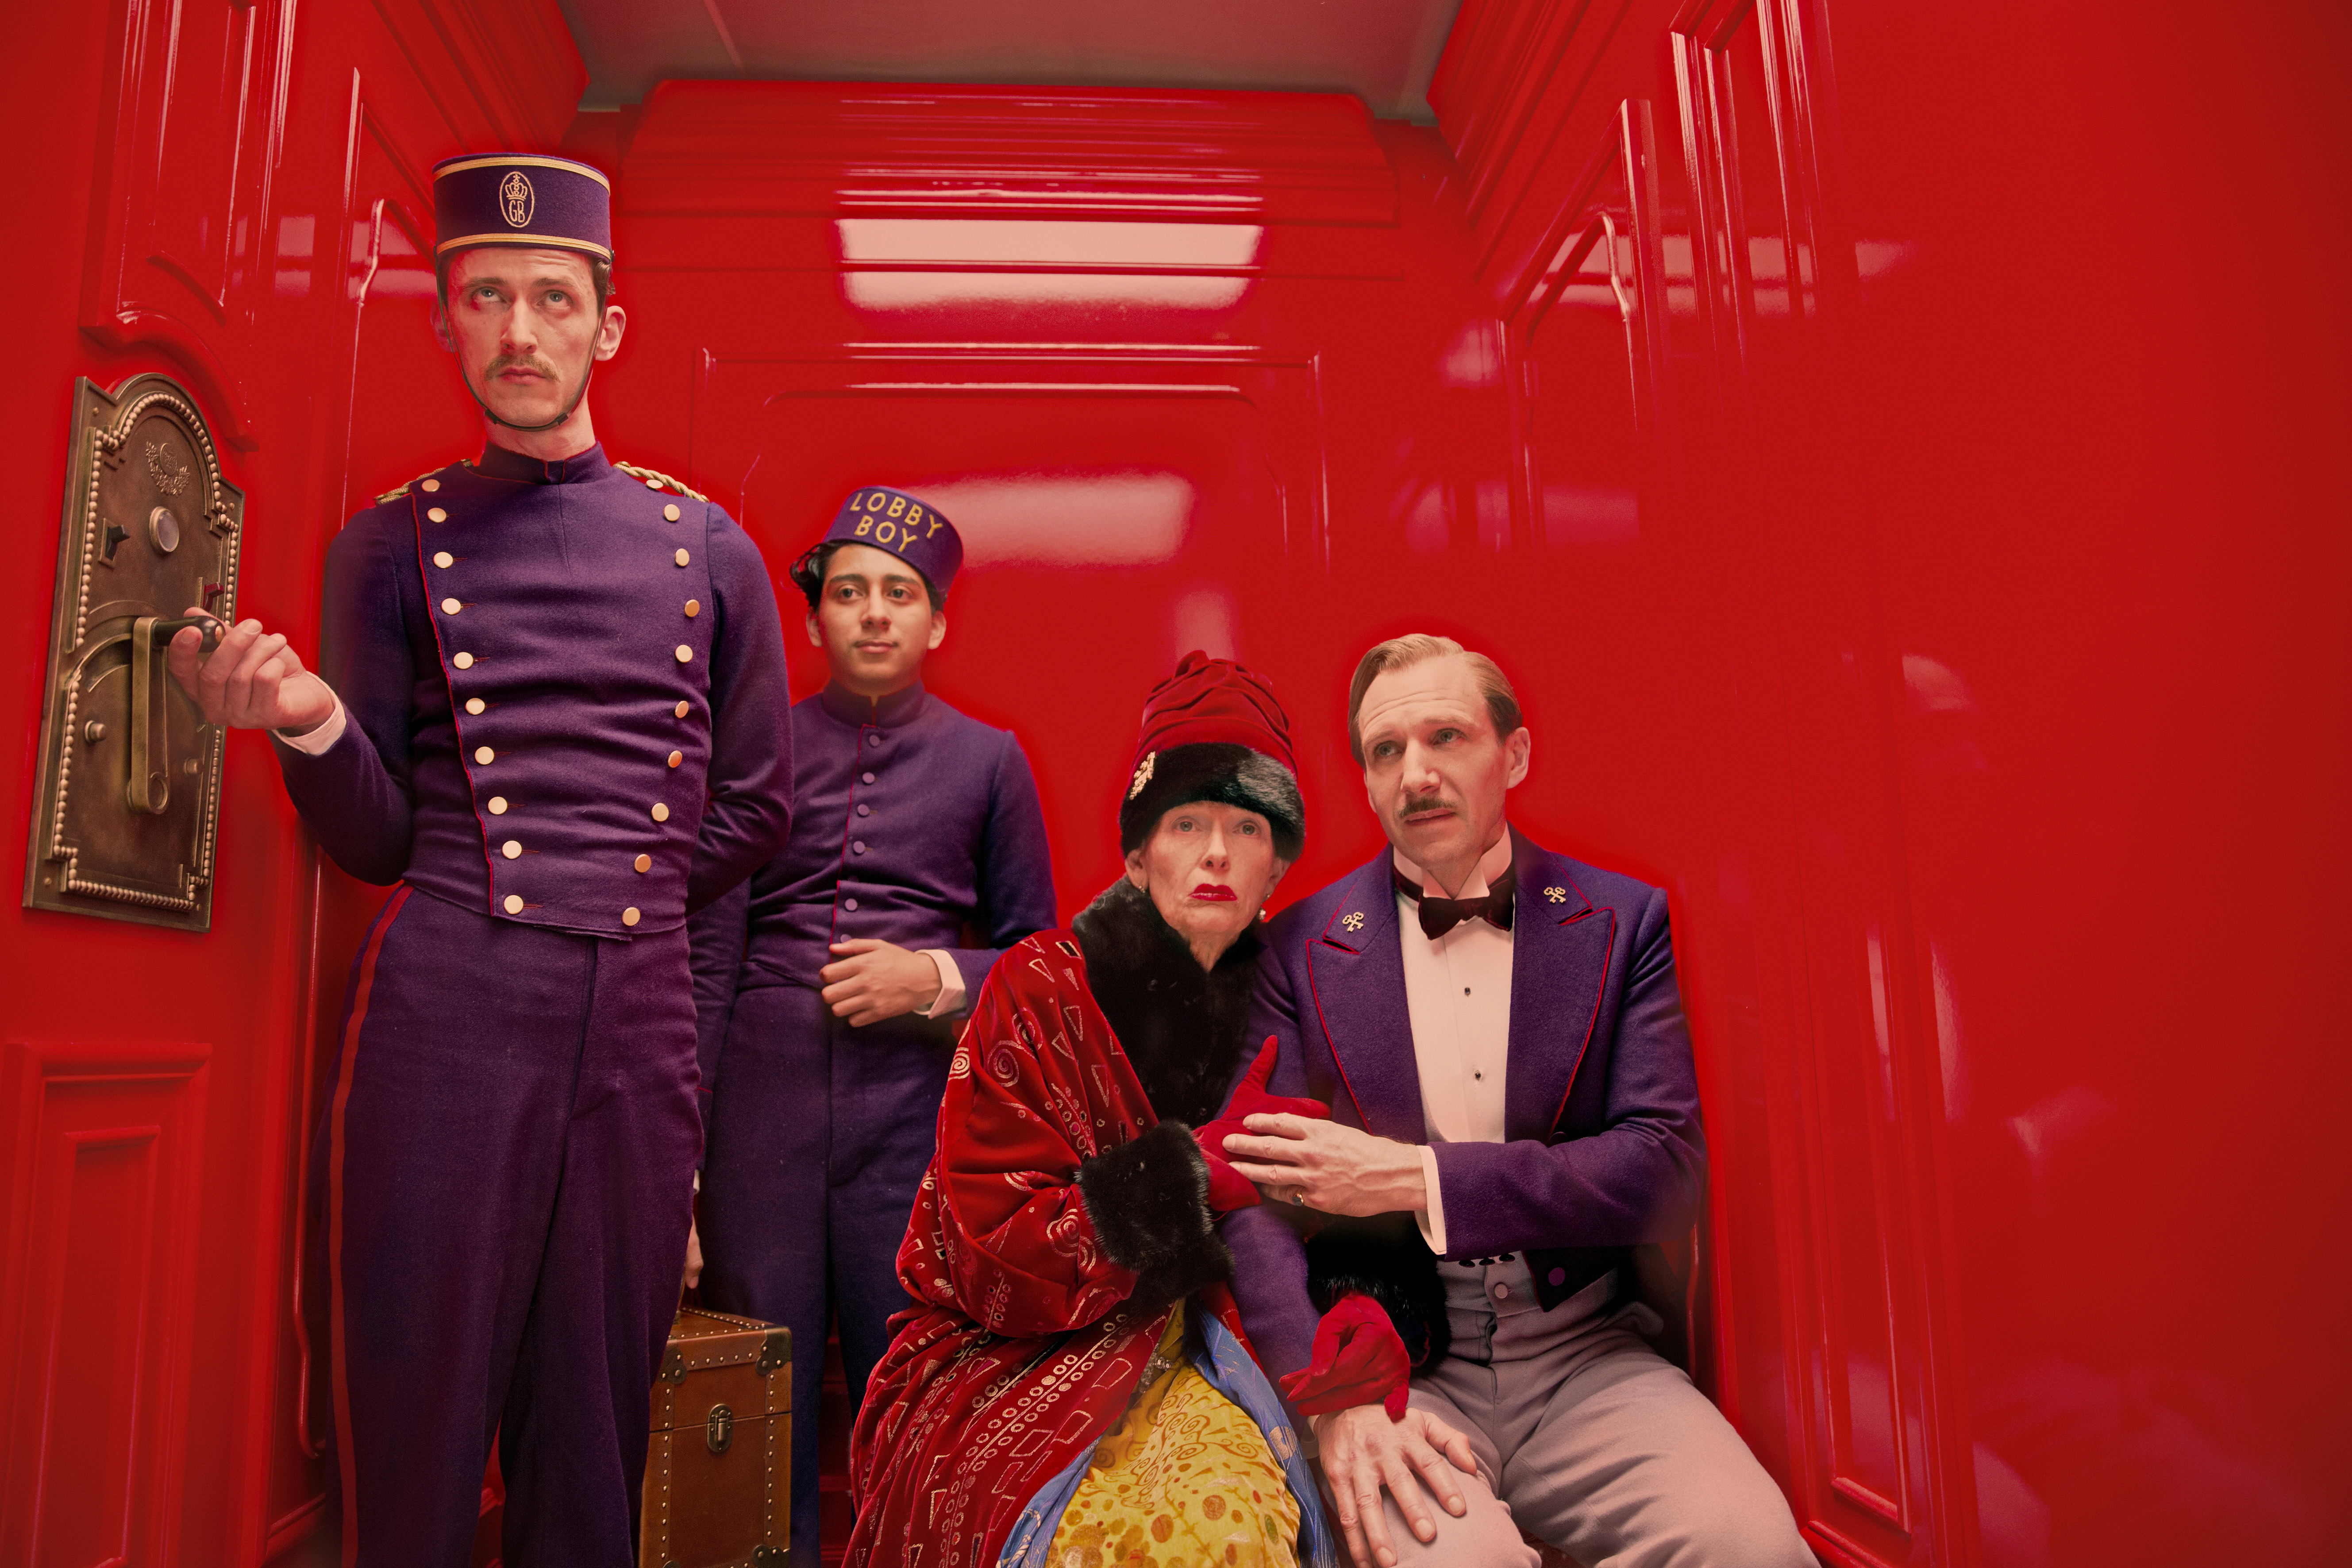 Unwrapping the layers of “The Grand Budapest Hotel”